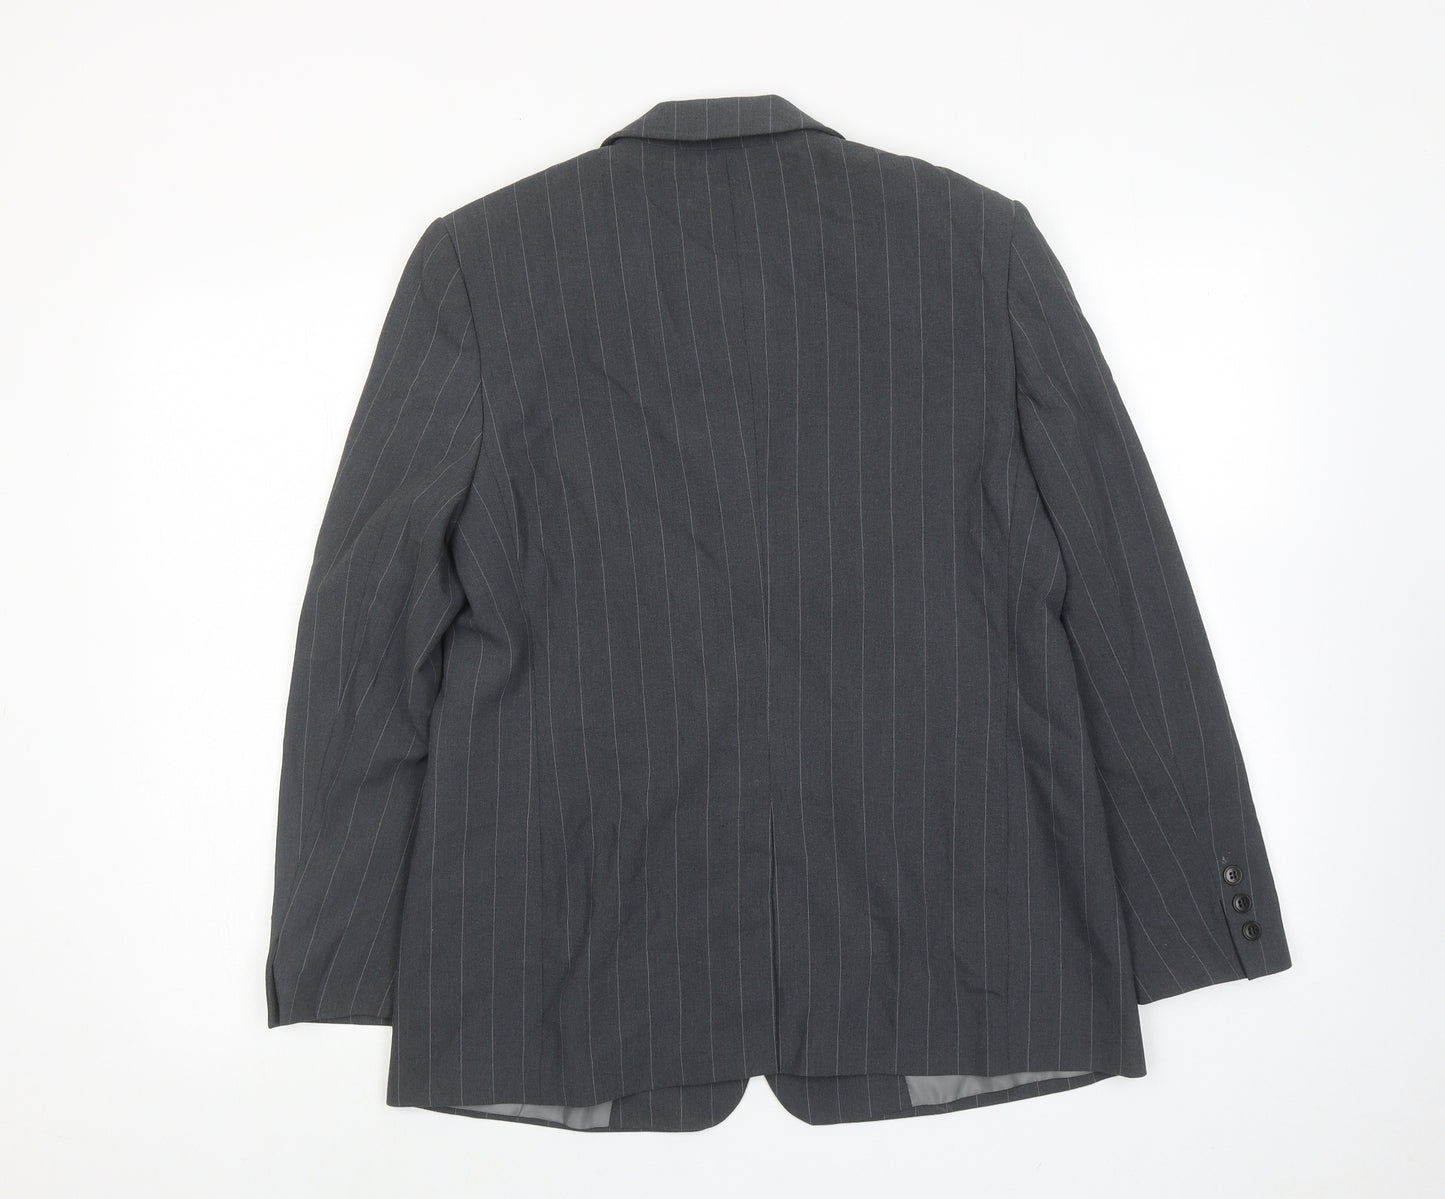 Marks and Spencer Womens Grey Pinstripe Polyester Jacket Suit Jacket Size 12